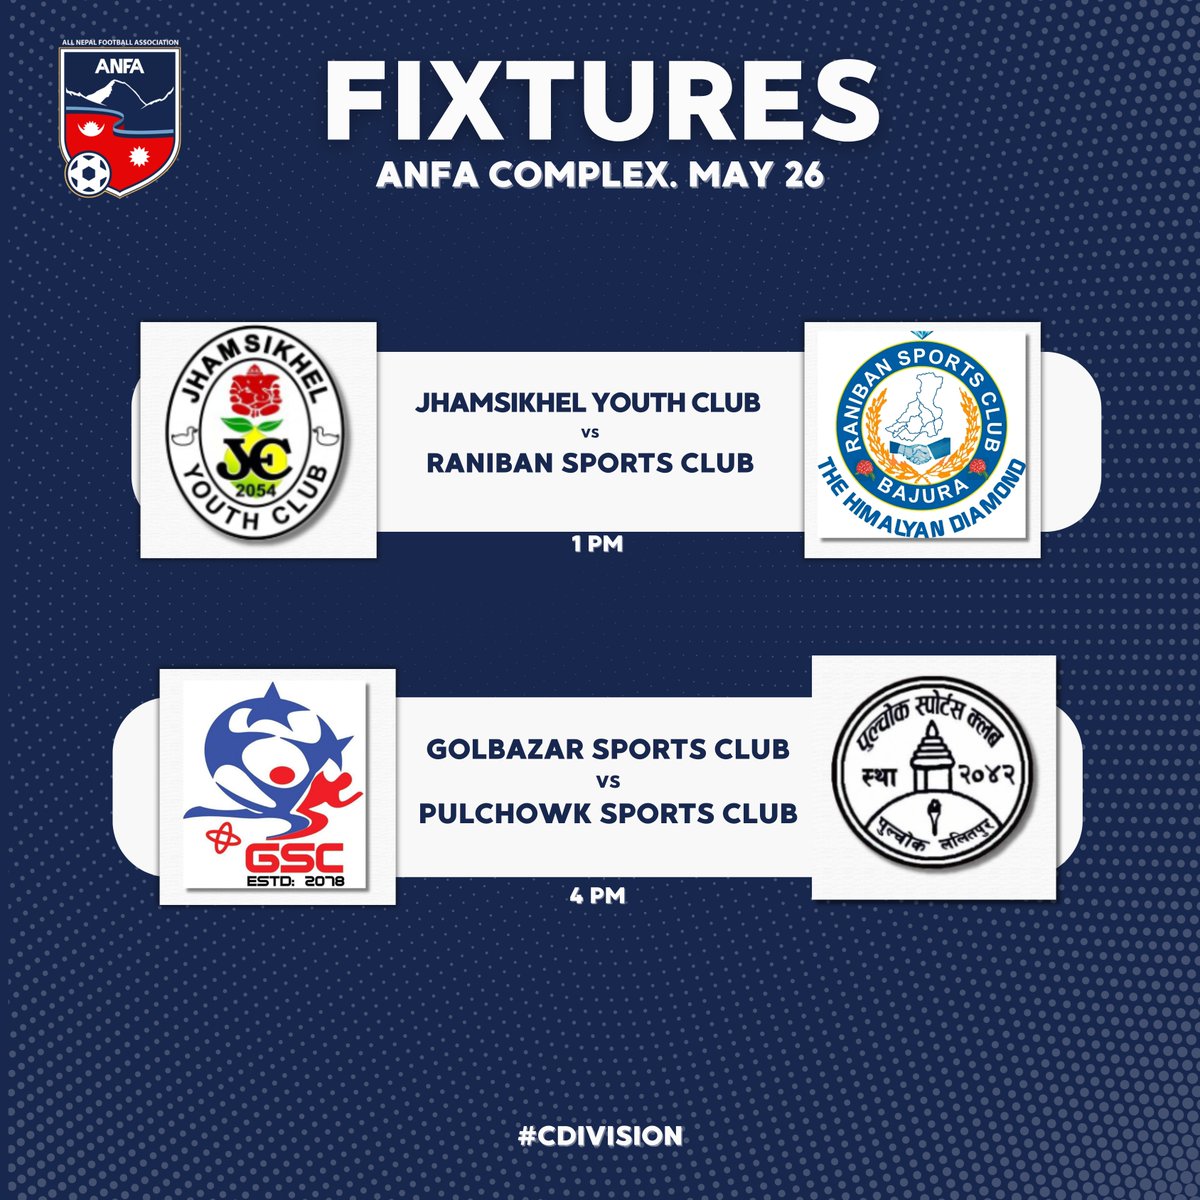 Sunday fixtures of #CDivision. #ANFA